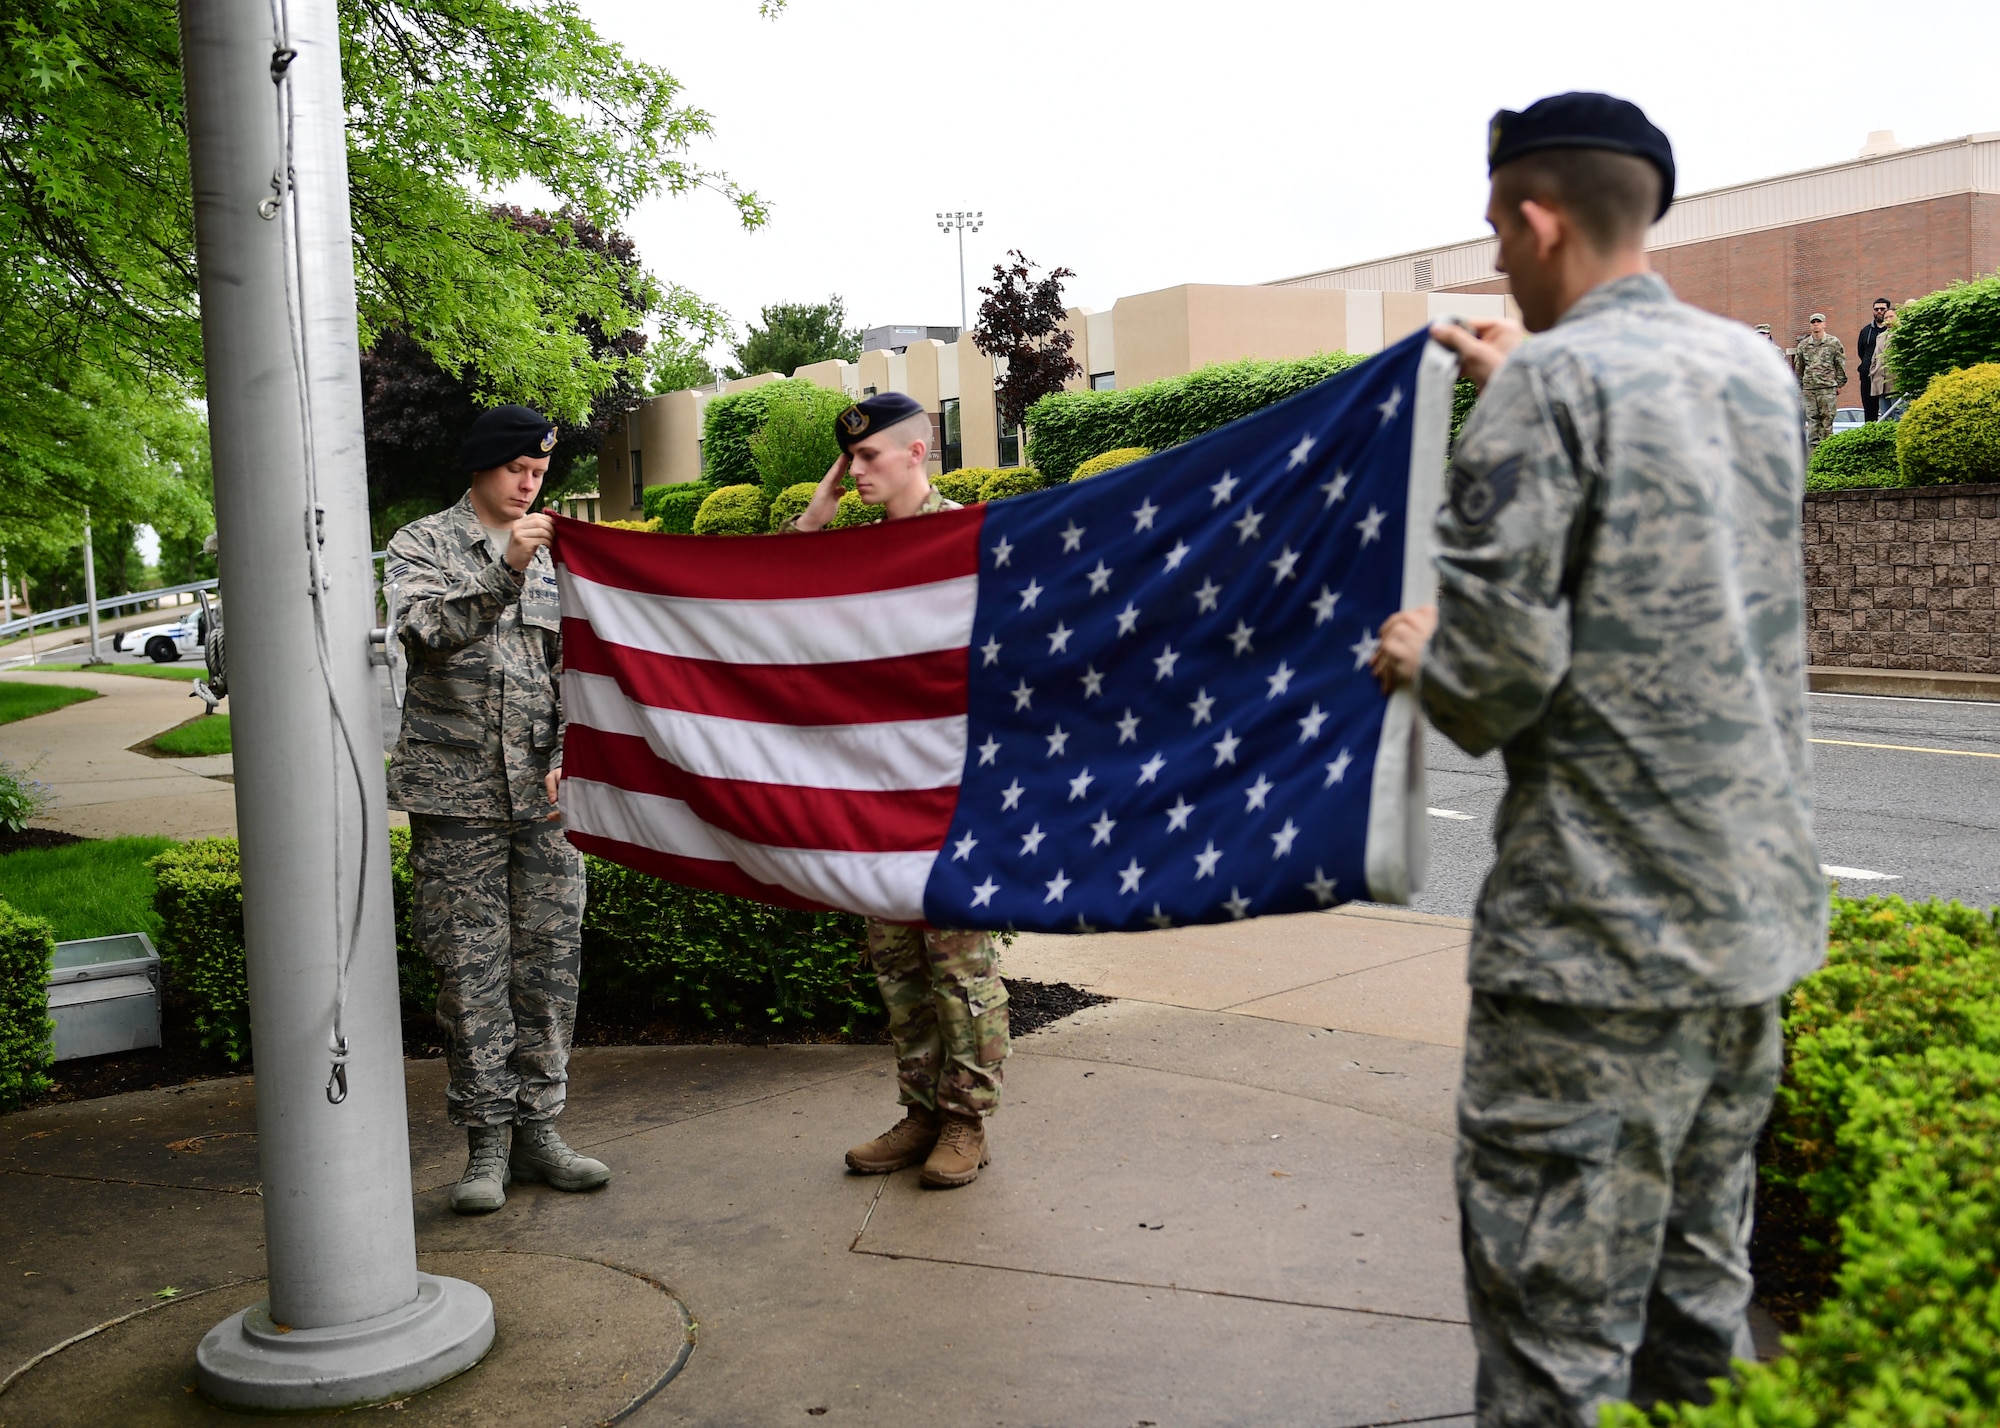 Staff Sgt. Berl Stinson, Senior Airmen Jeremy Freeland and Michael Beatty, members of the 911th Security Forces Squadron, perform a flag folding ceremony at the Pittsburgh International Airport Air Reserve Station, Pennsylvania, May 13, 2019. The flag ceremony kicked off the Law Enforcement Week celebrations that the 911th SFS hosted throughout the week. (U.S. Air Force photo by Senior Airman Grace Thomson)